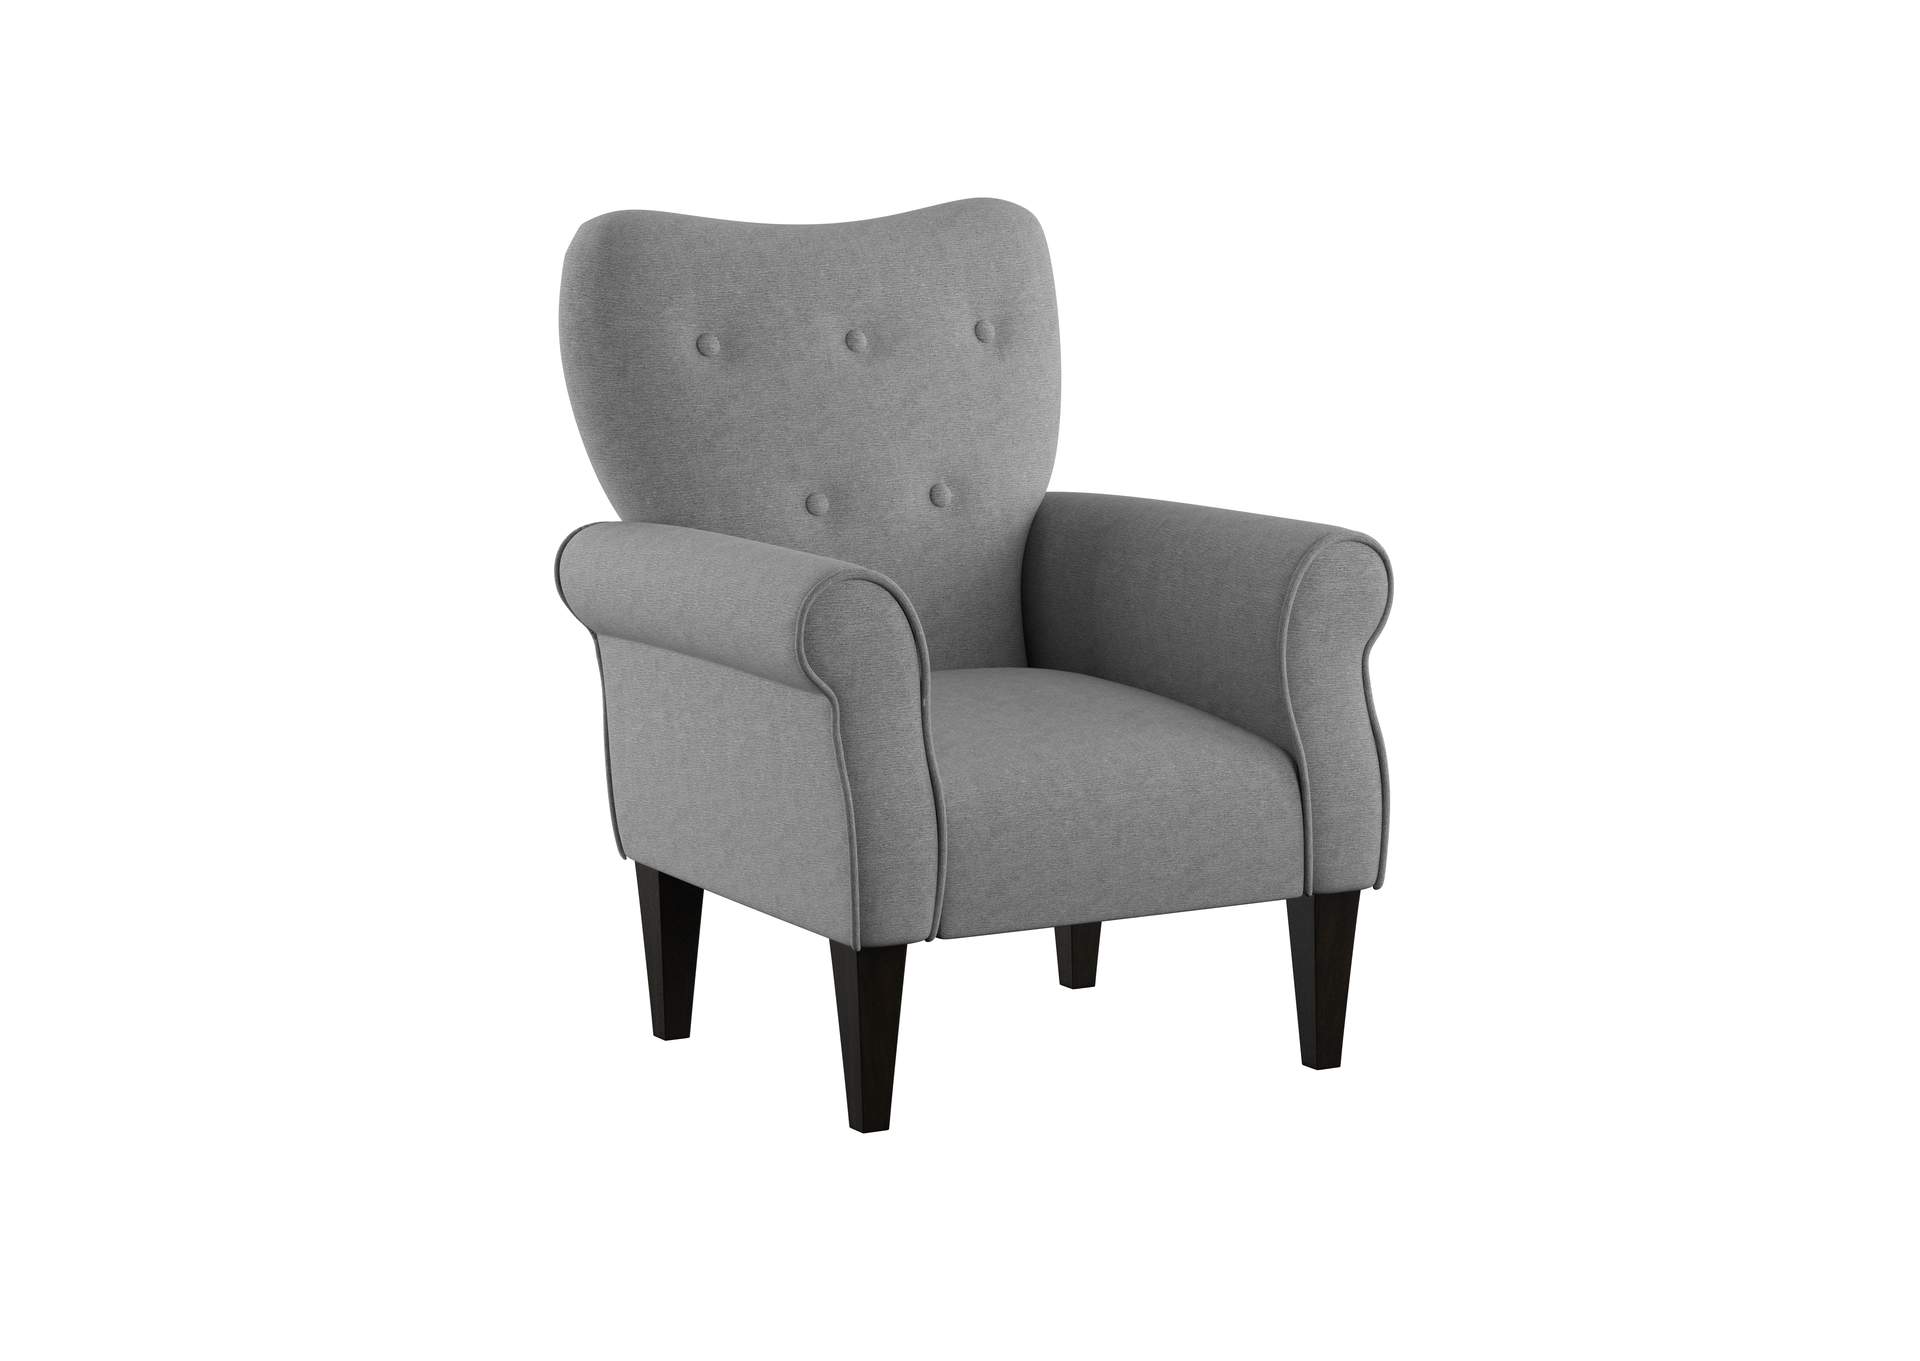 Lydia Accent Chair,Emerald Home Furnishings